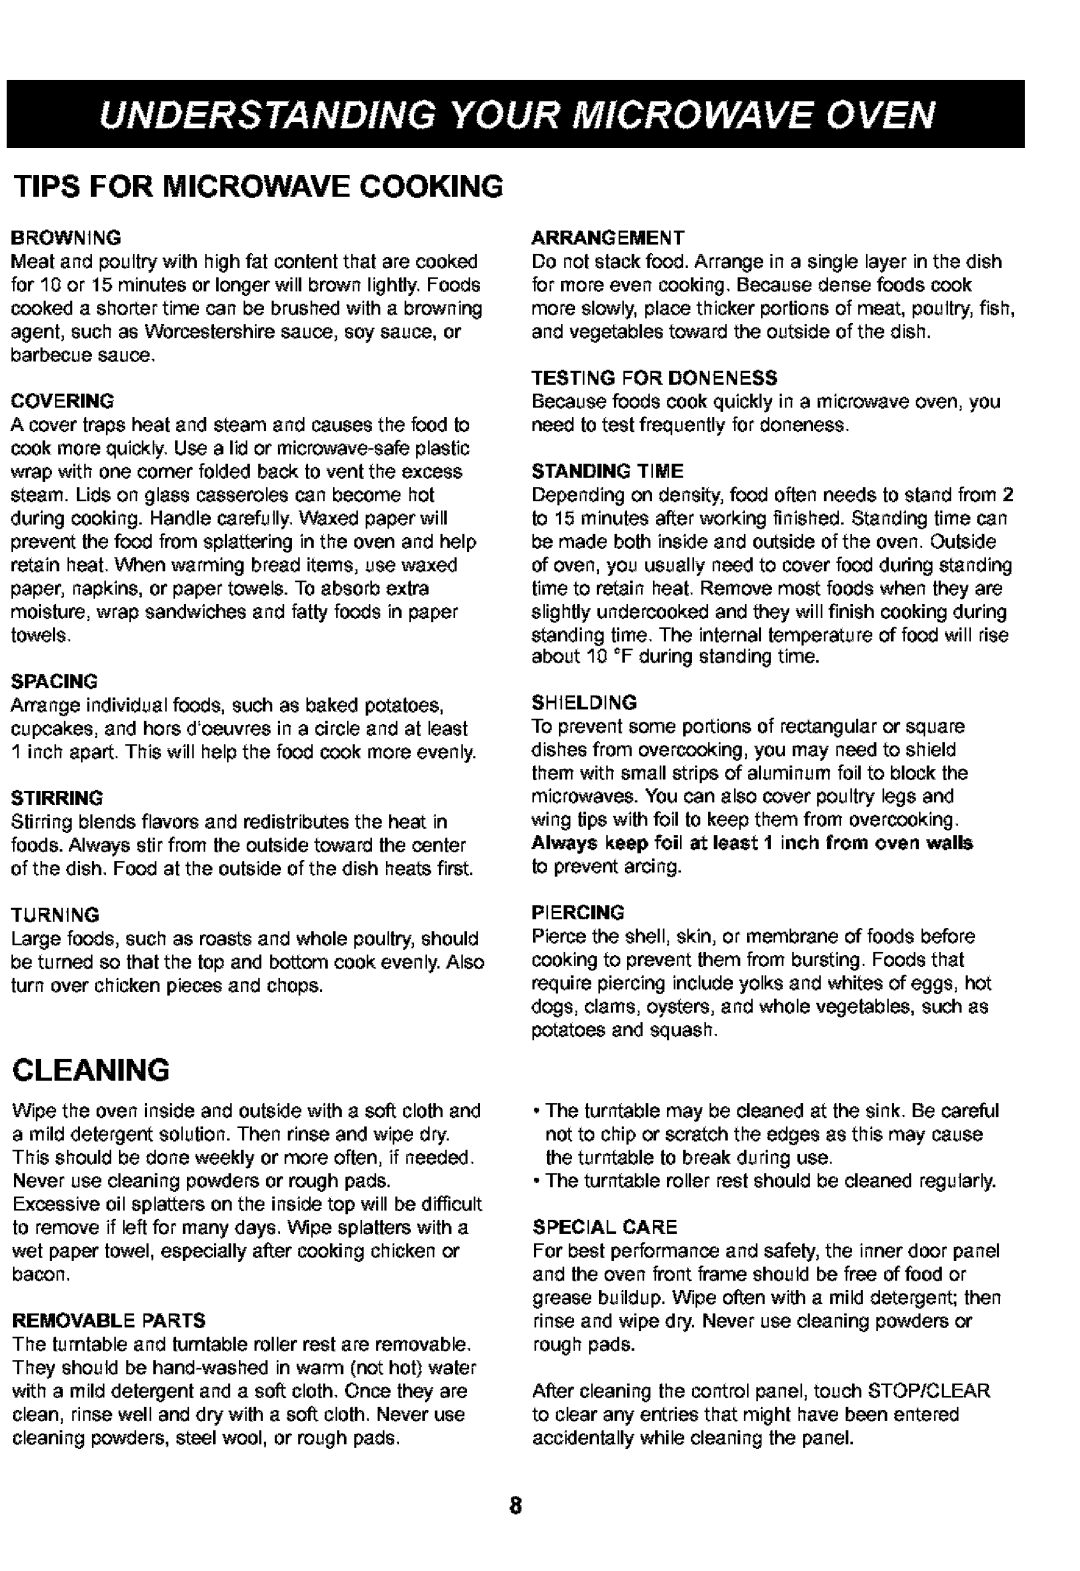 Kenmore 721.63109, 721.63102 manual Cleaning, Tips For Microwave Cooking 